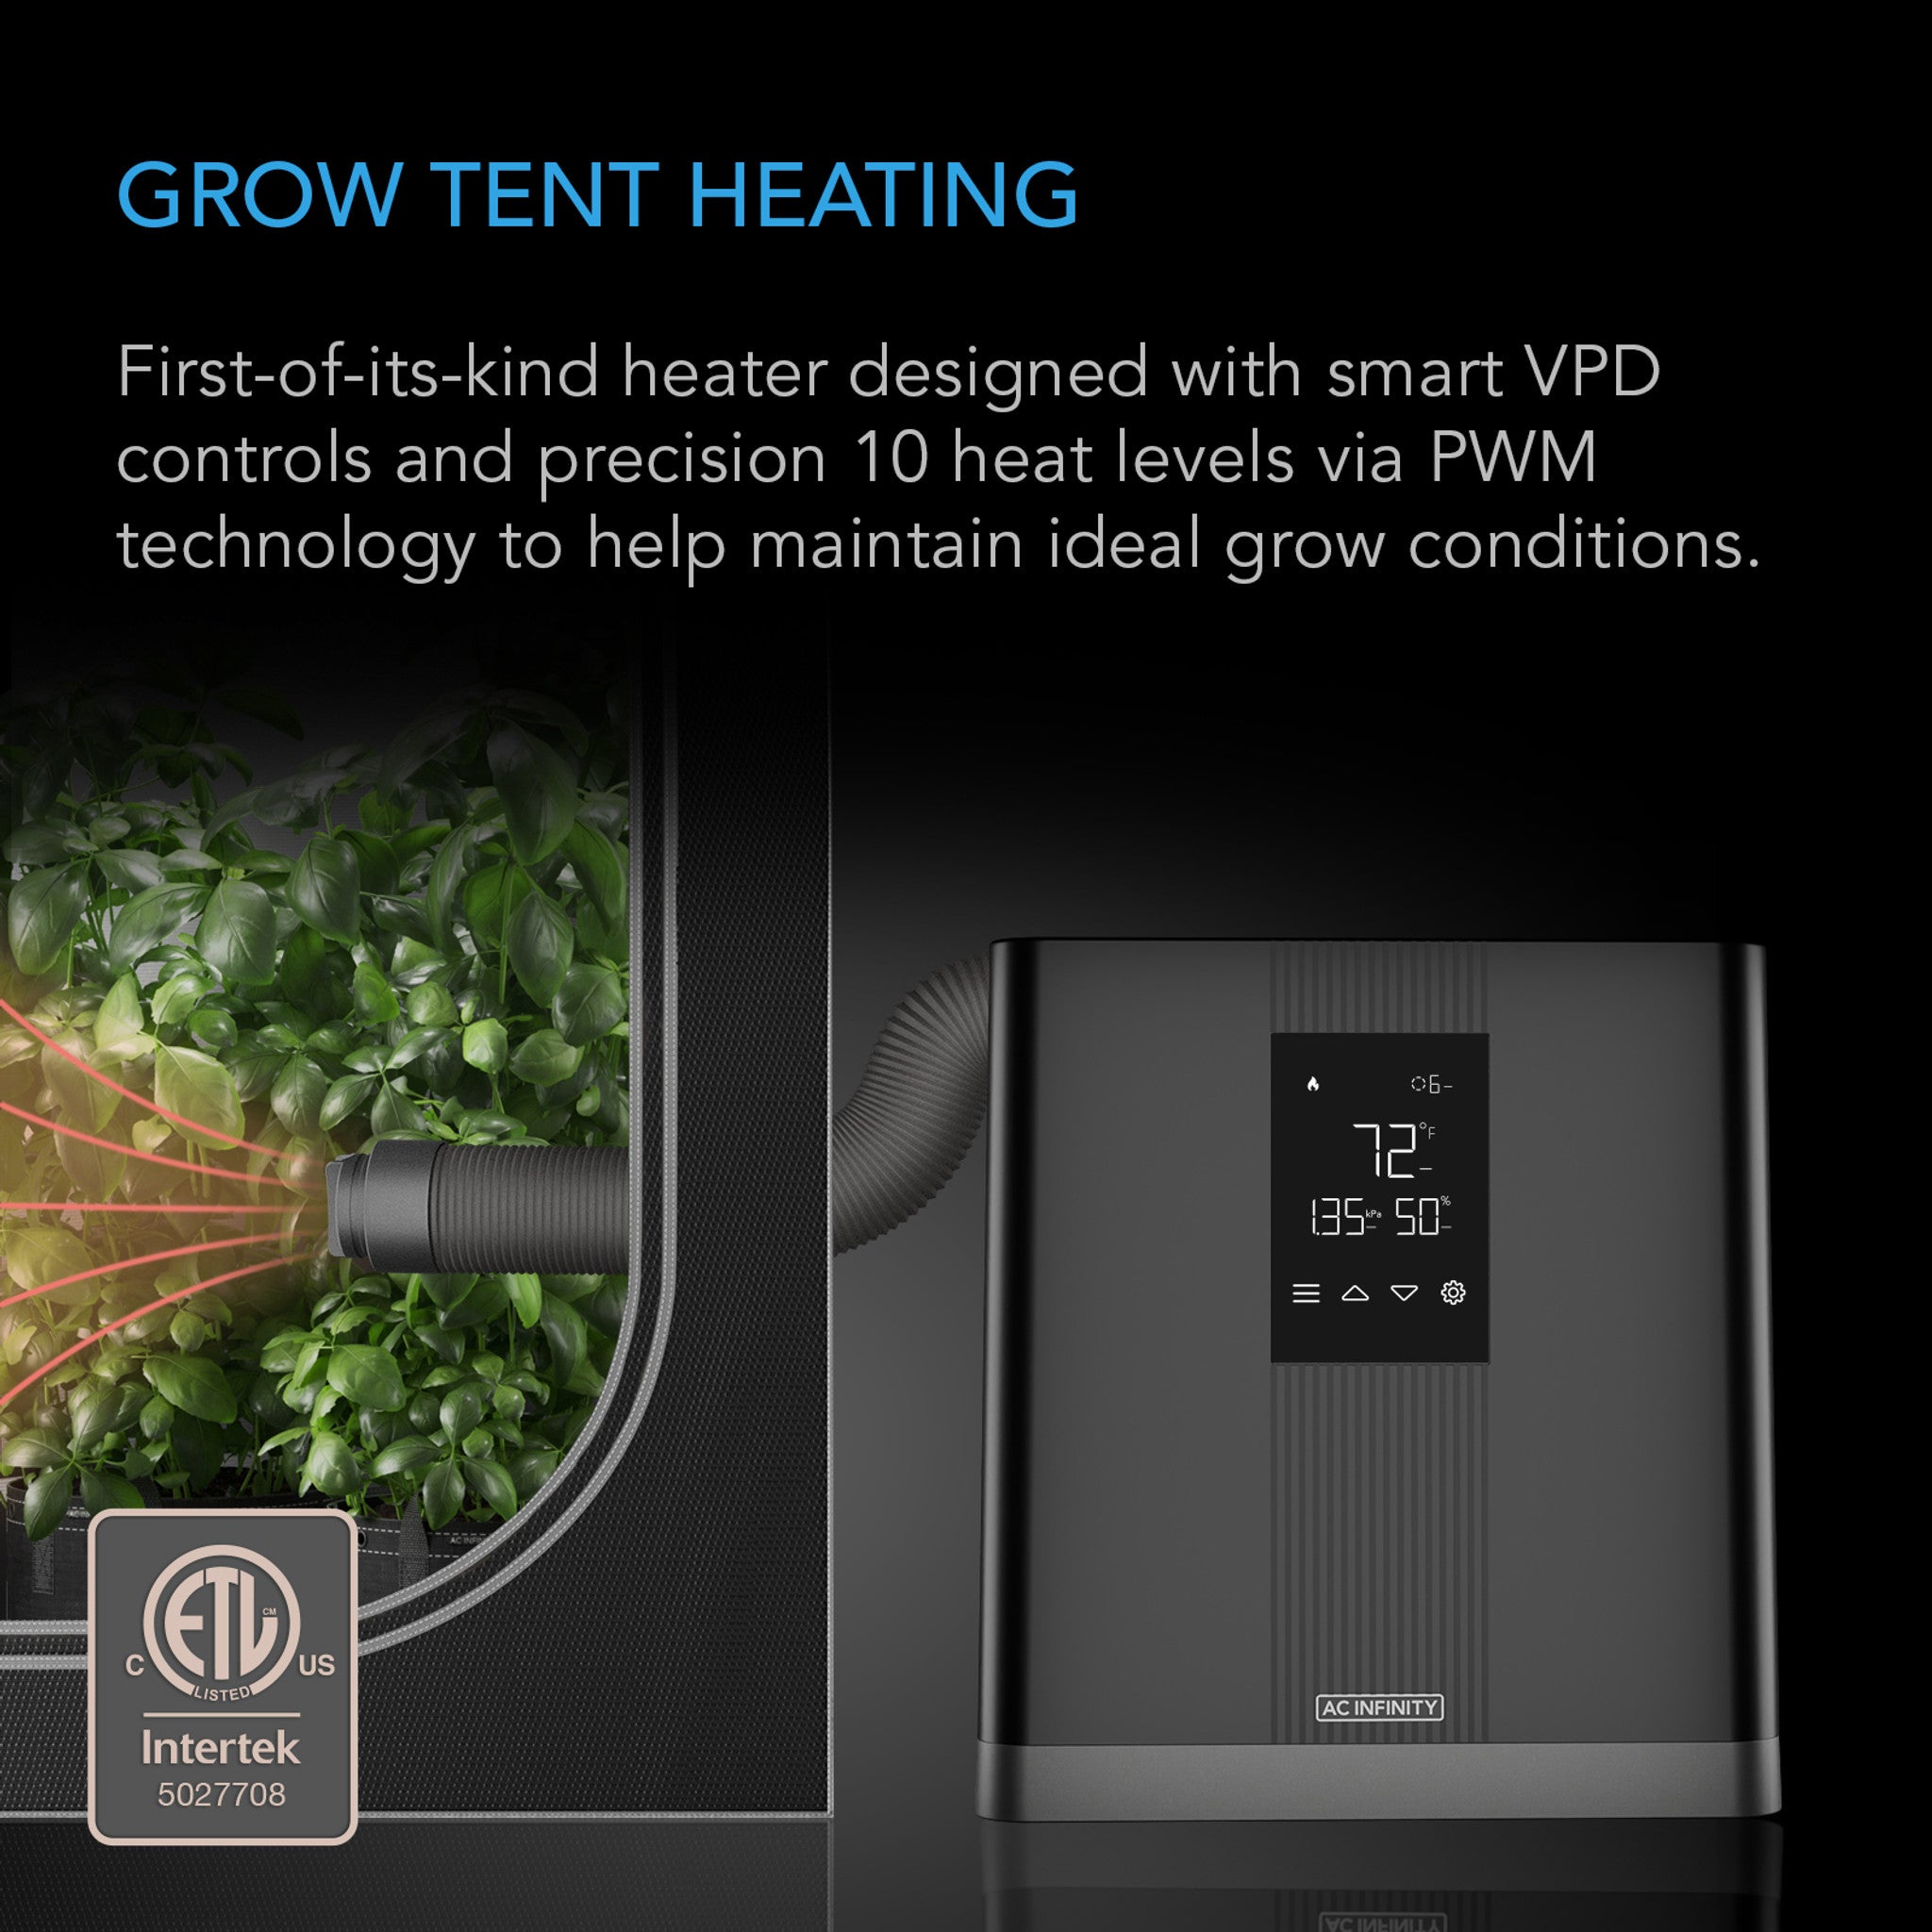 THERMOFORGE T3, ENVIRONMENTAL PLANT HEATER, SMART VPD CONTROLS, TRUE 10 HEAT LEVELS, TUBING EXTENDS INTO GROW TENT